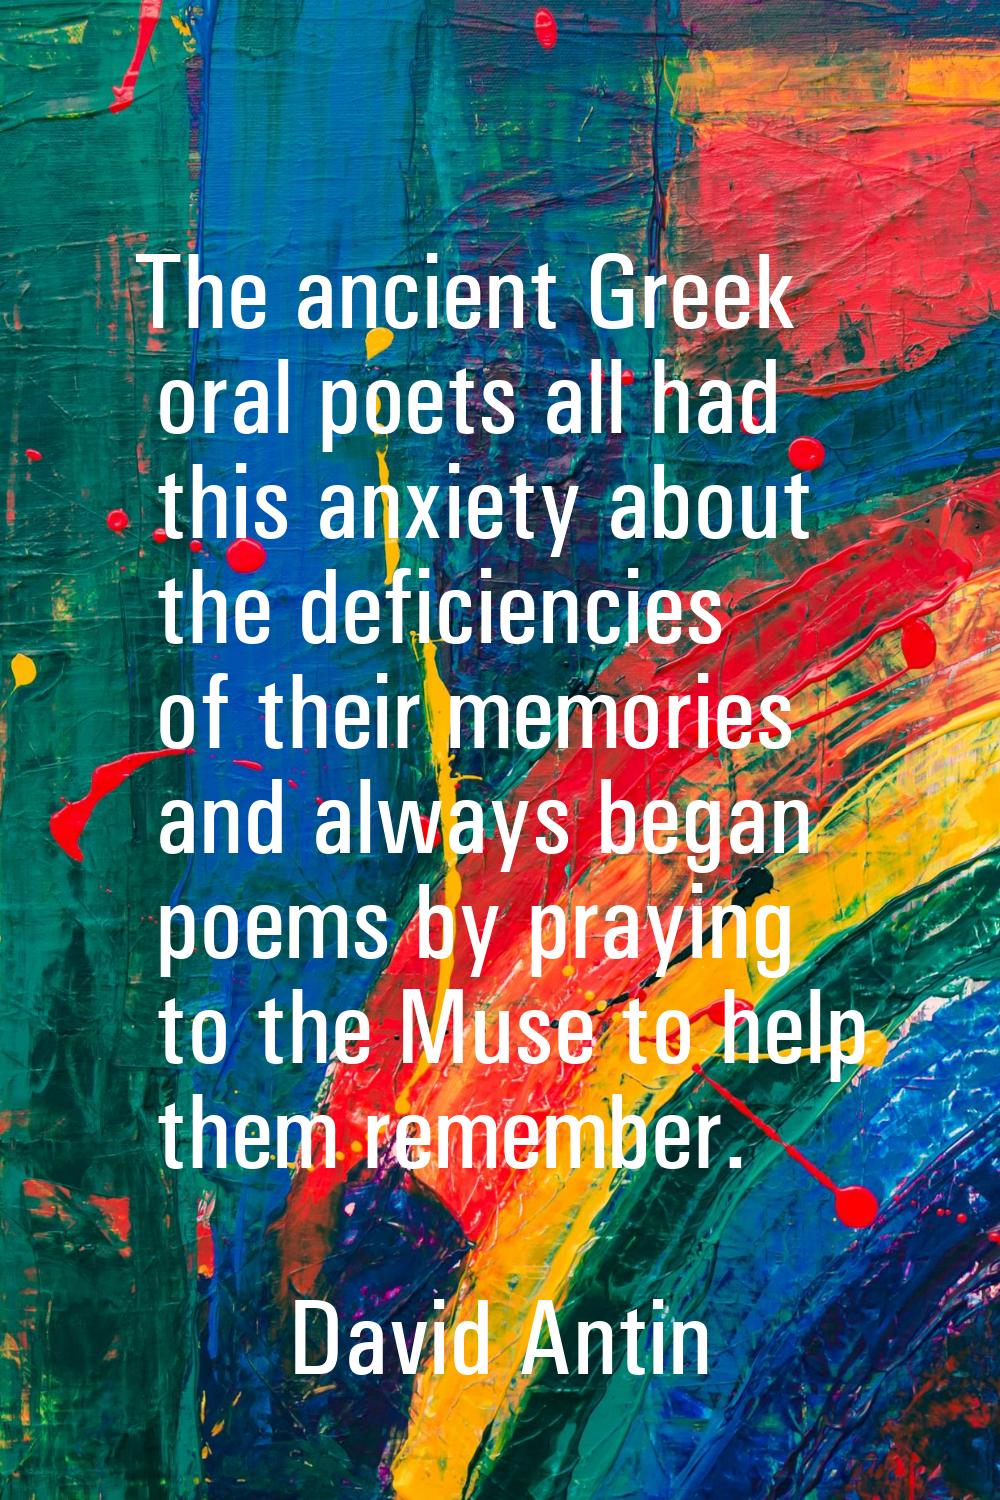 The ancient Greek oral poets all had this anxiety about the deficiencies of their memories and alwa